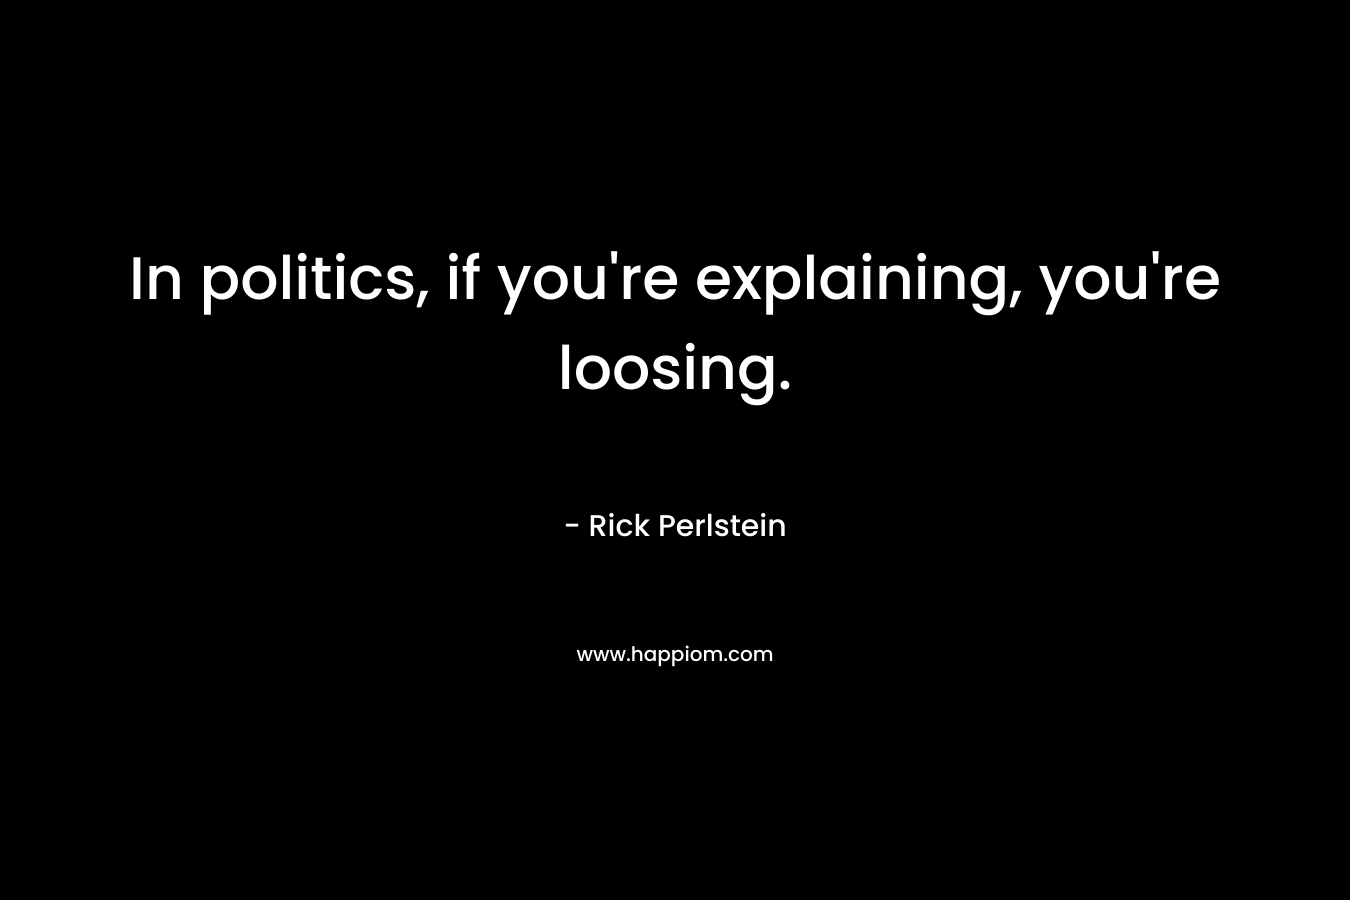 In politics, if you’re explaining, you’re loosing. – Rick Perlstein